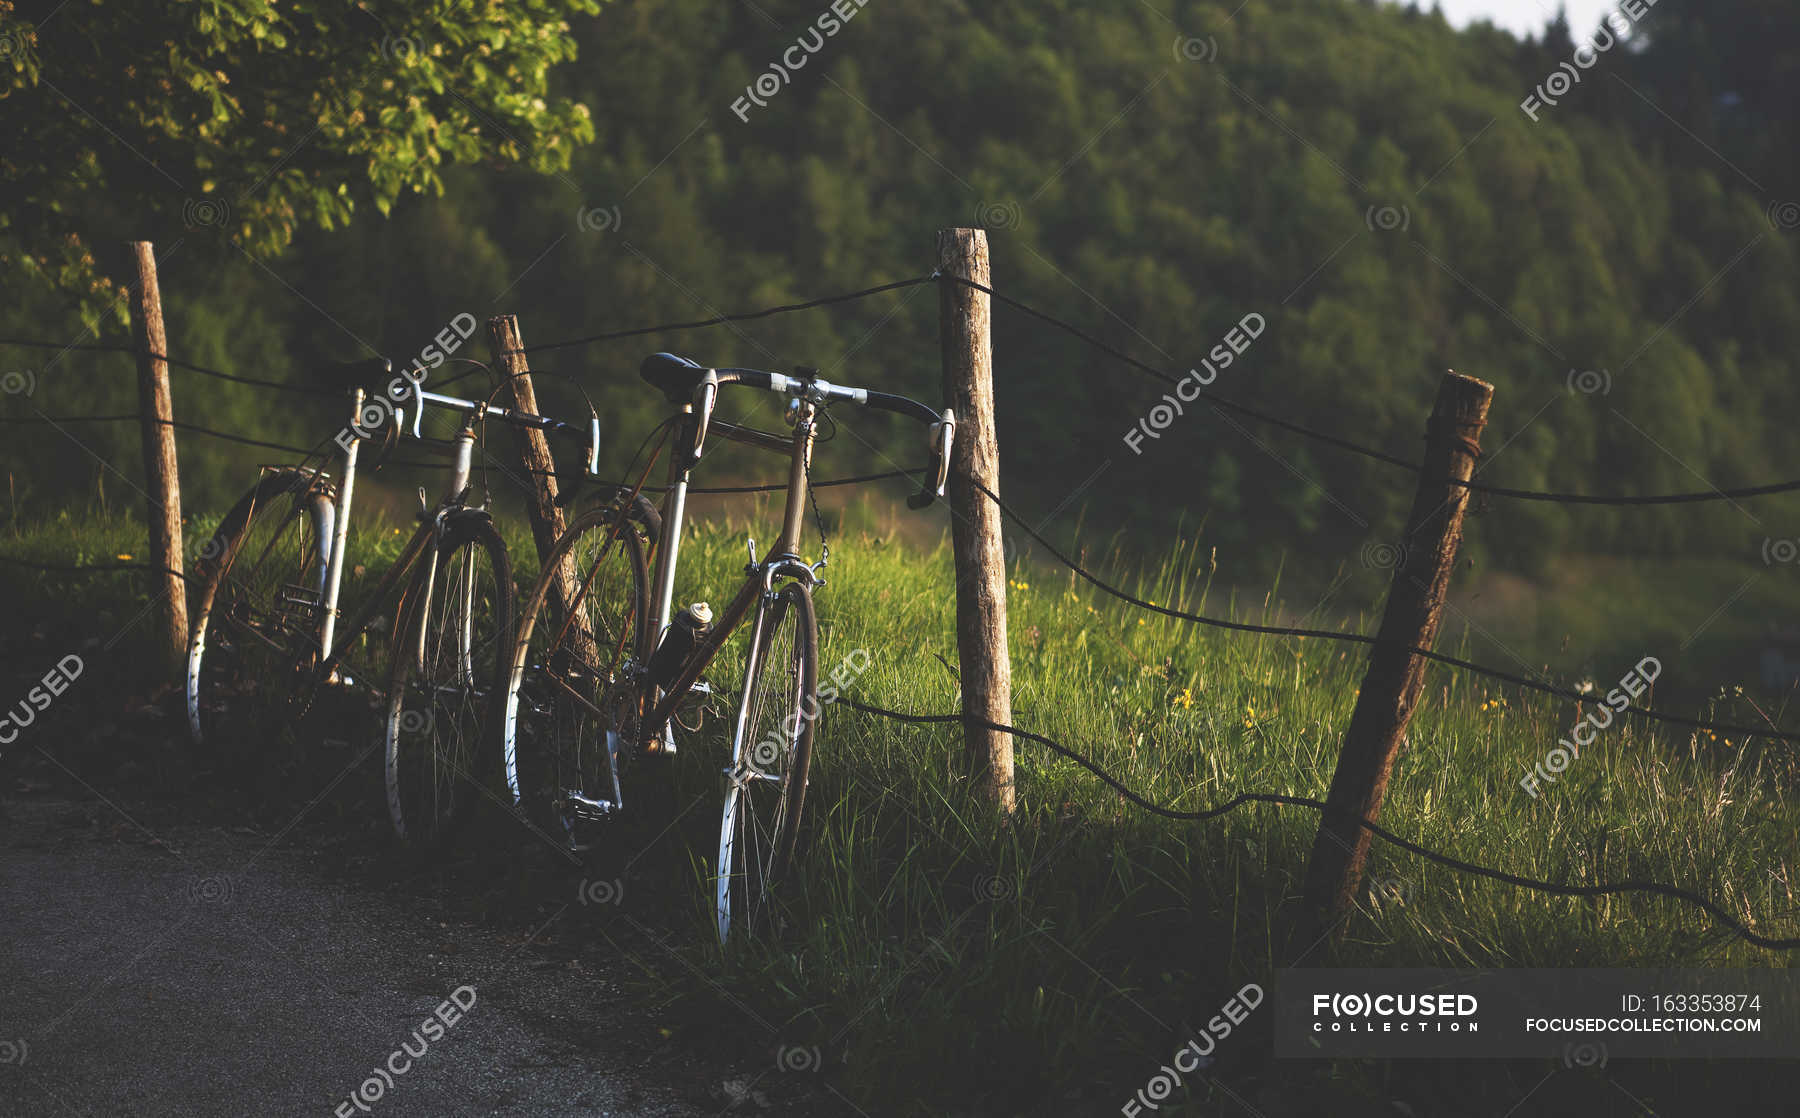 Bicycles leaning against rickety fence — Stock Photo | #163353874